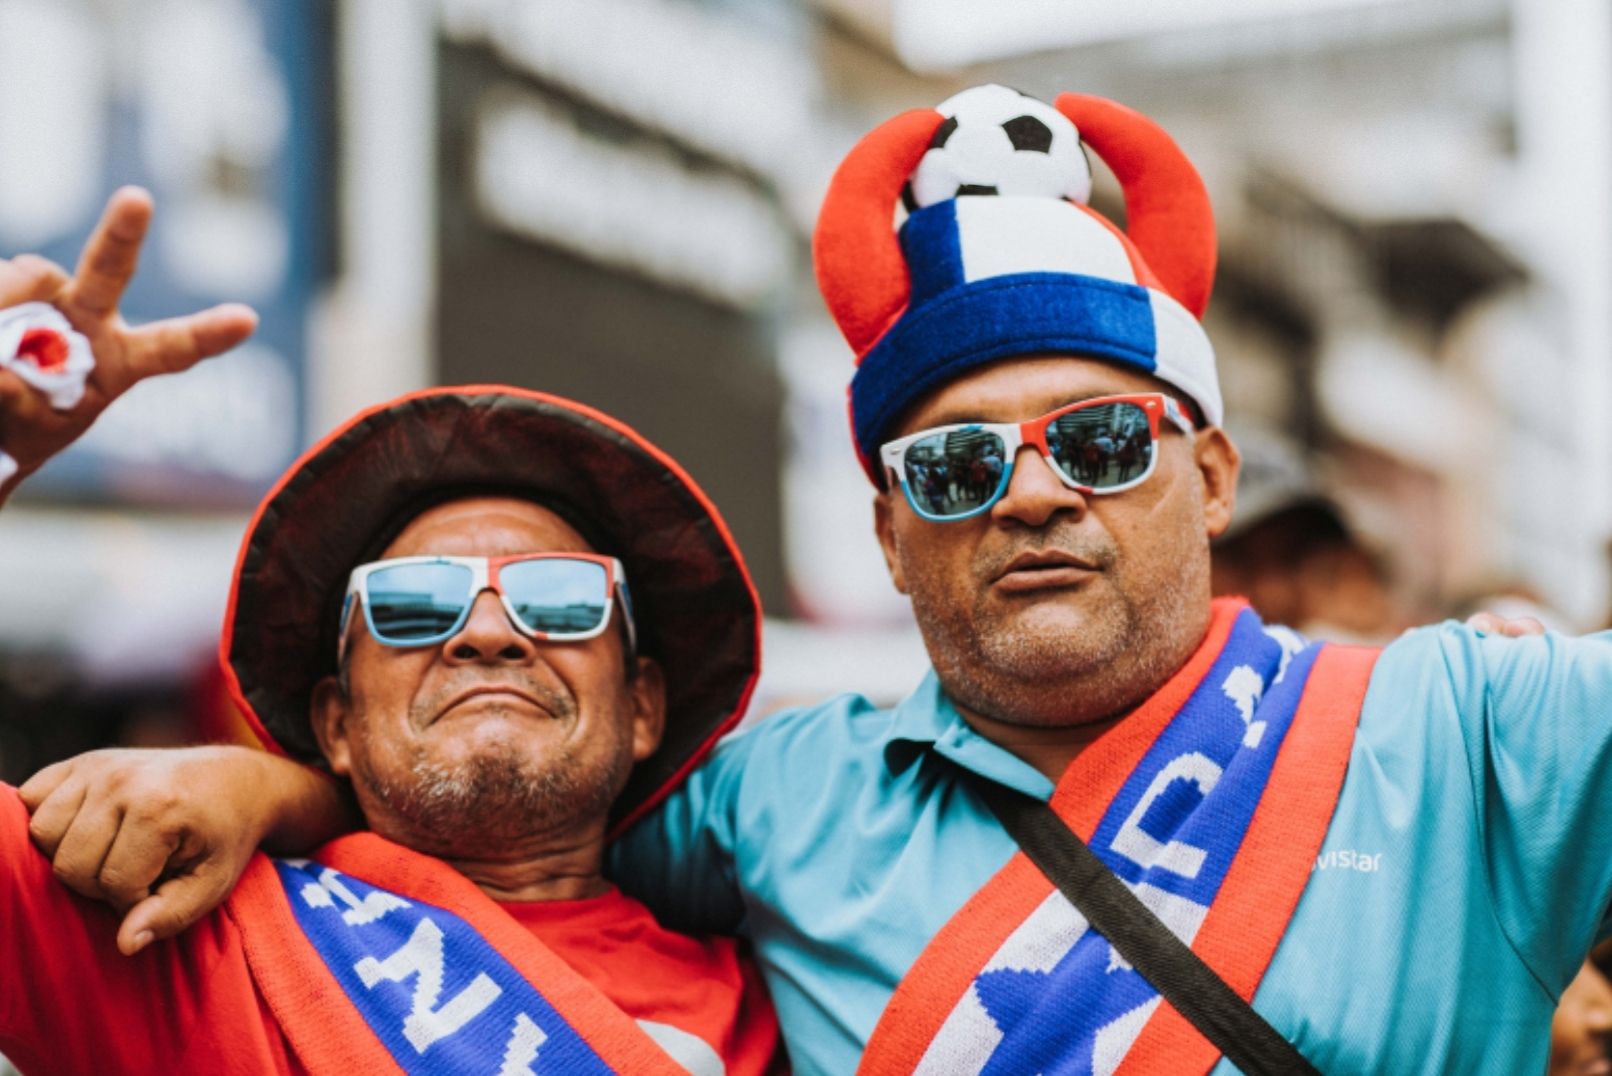 Photo by Luis Quintero: https://www.pexels.com/photo/two-person-s-wearing-sunglasses-1659702/